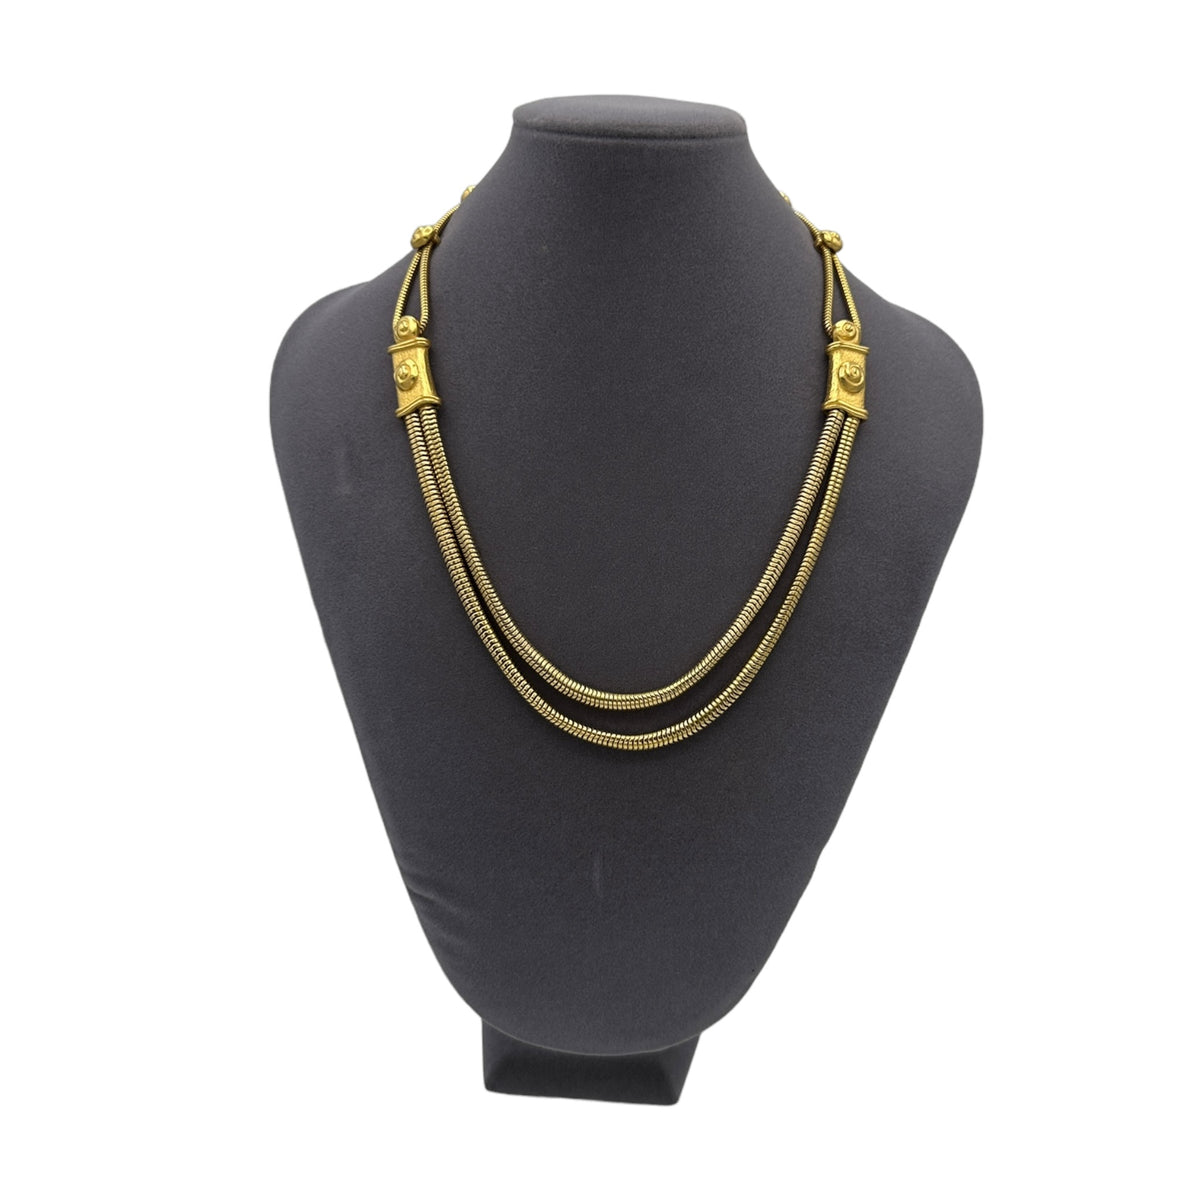 Gold Etruscan Revival Double Snake Chain Vintage Necklace